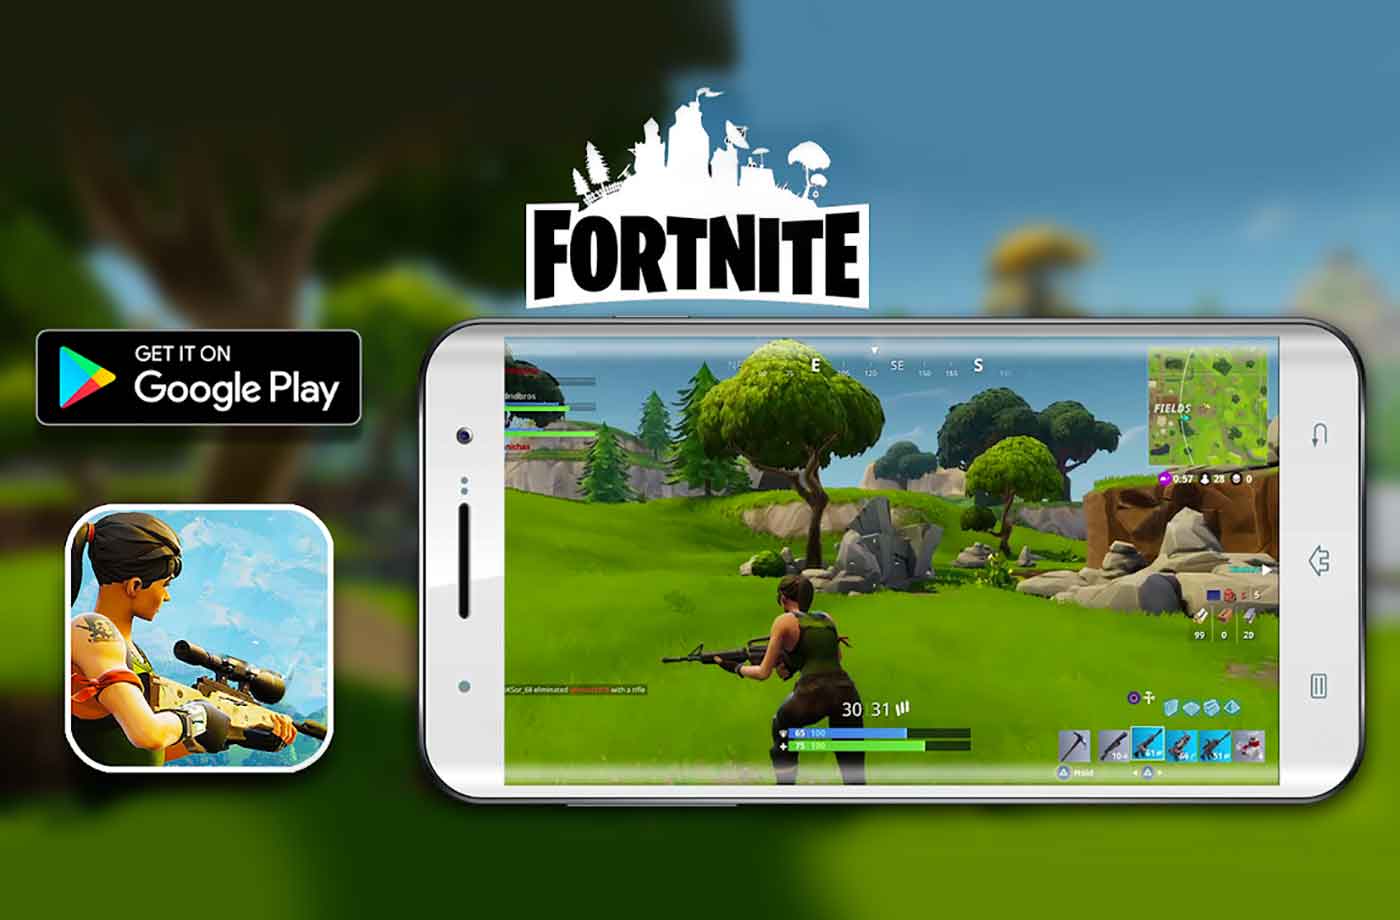 fortnite mobile android apk - is fortnite mobile on android